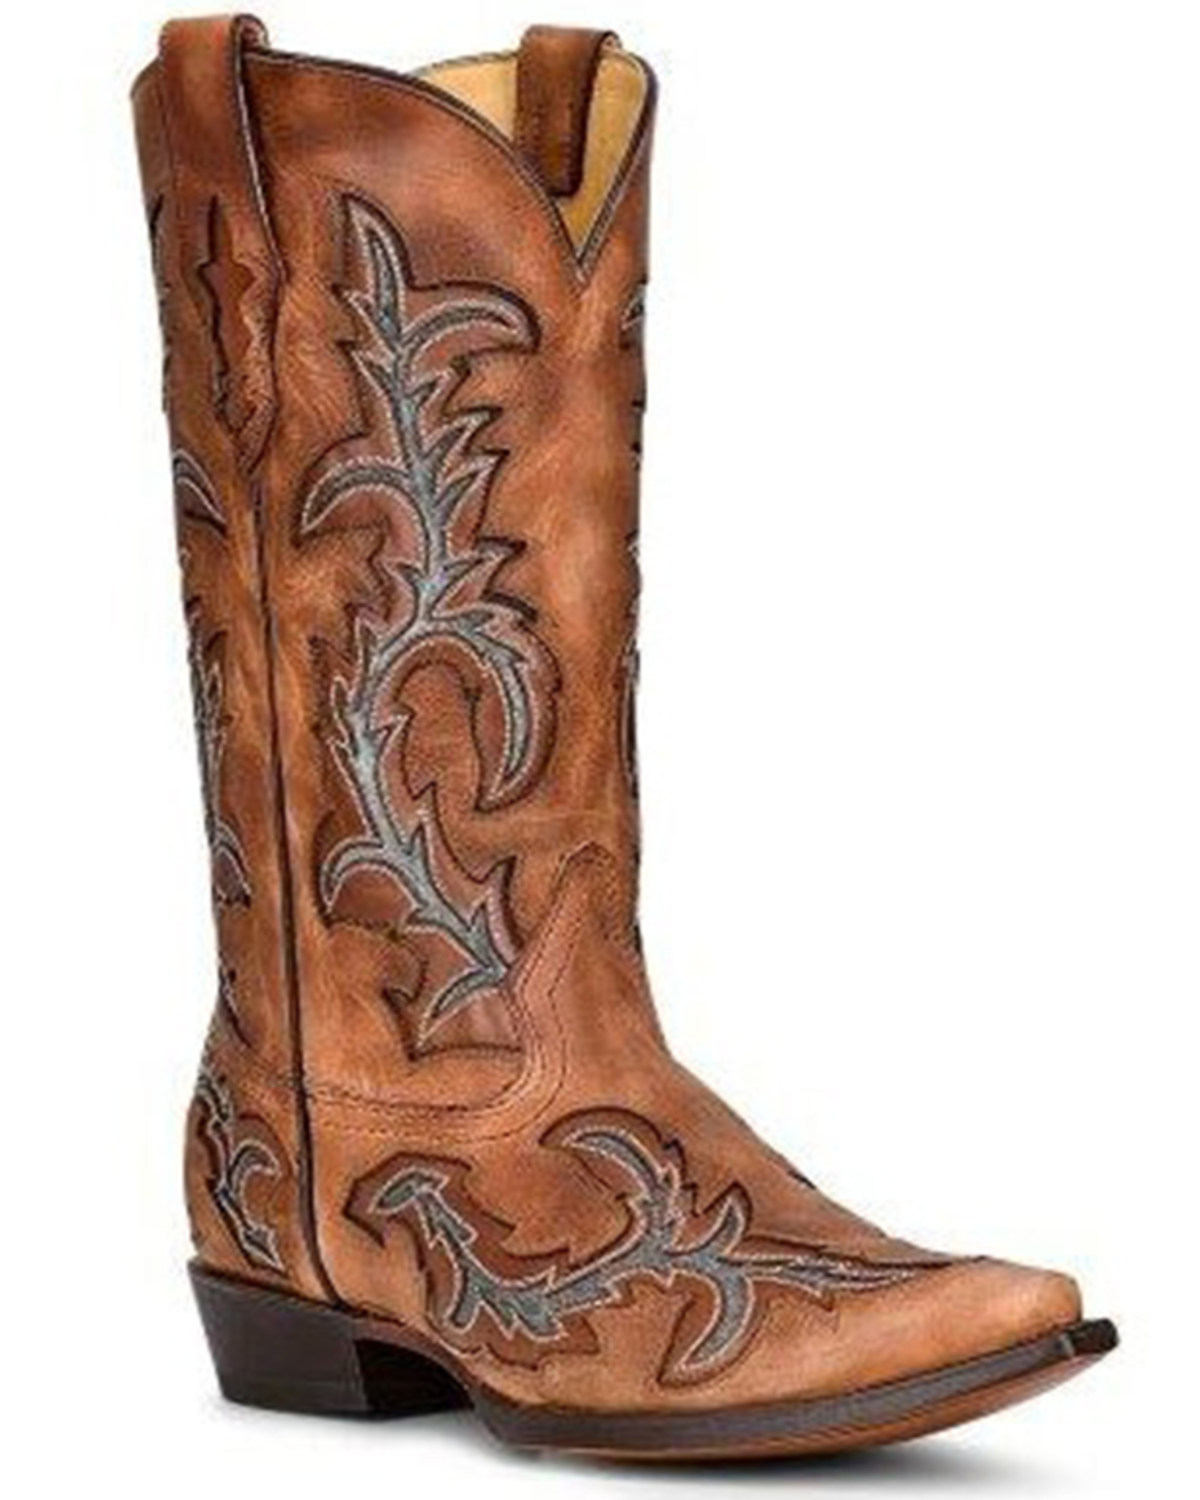 Corral Men's Embroidery & Inlay Western Boots - Snip Toe